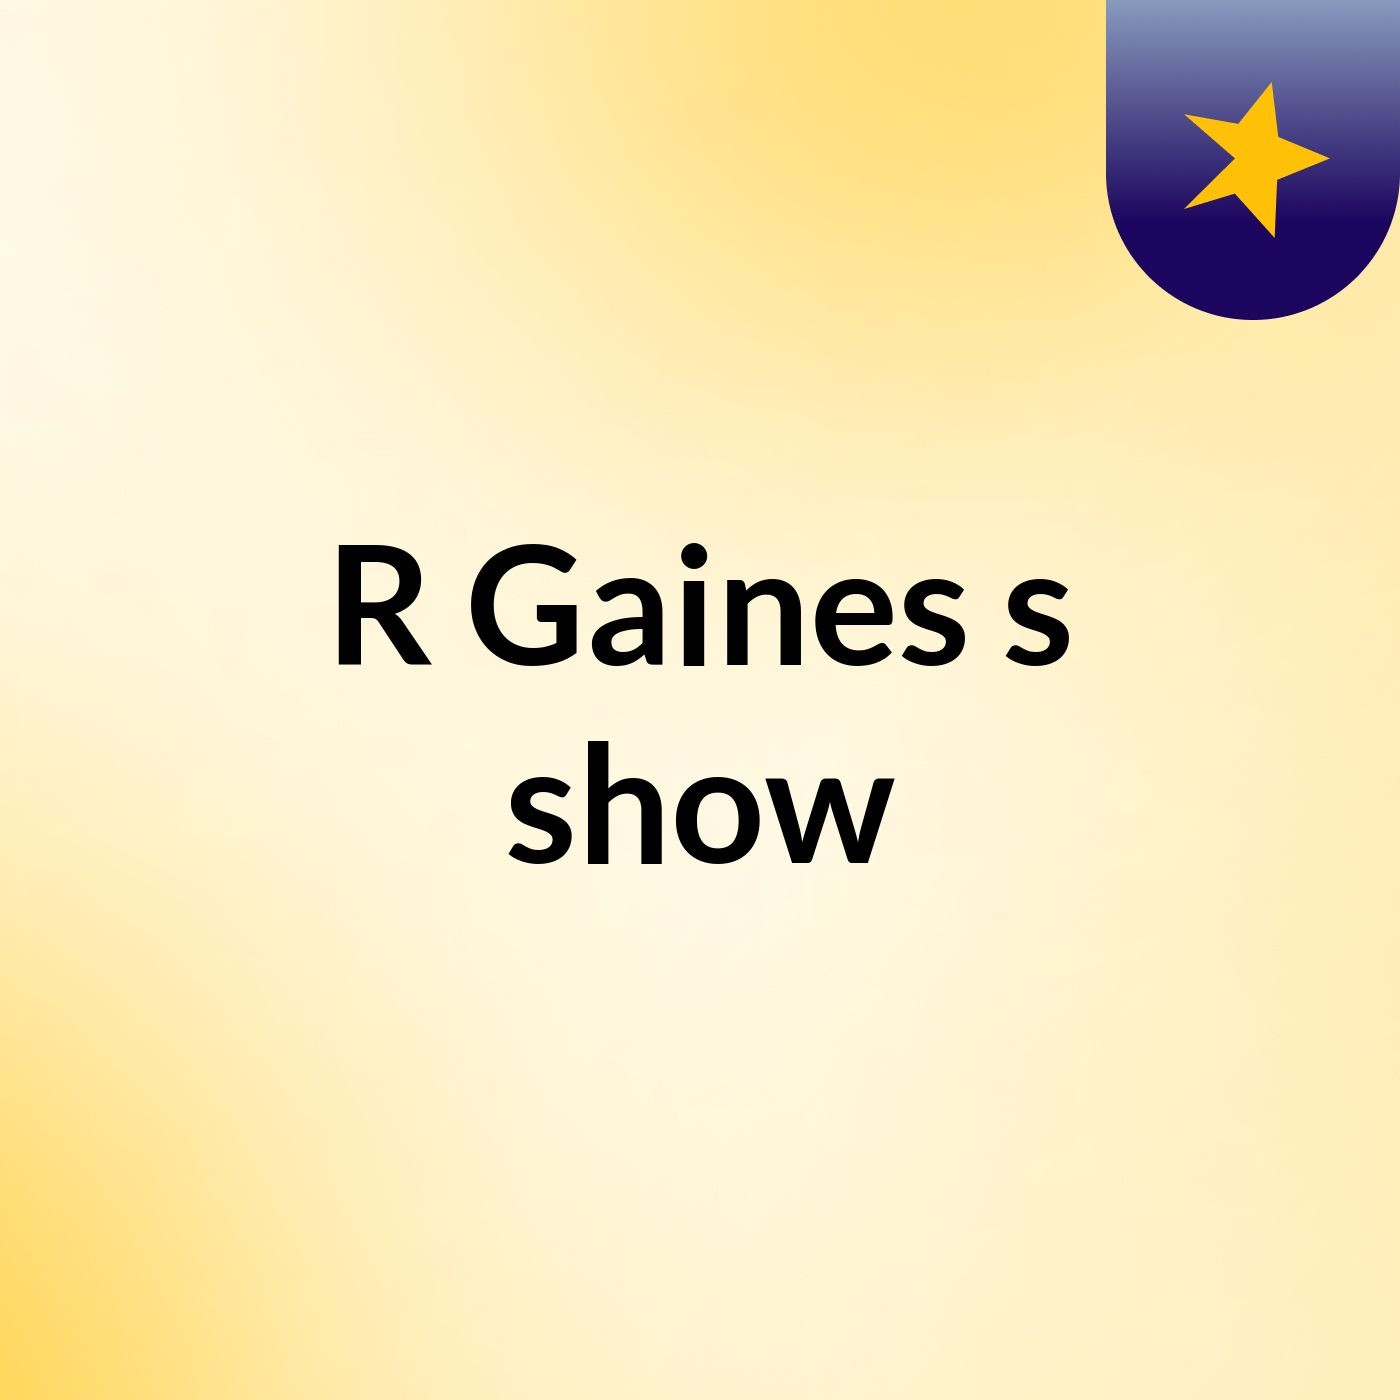 R Gaines's show